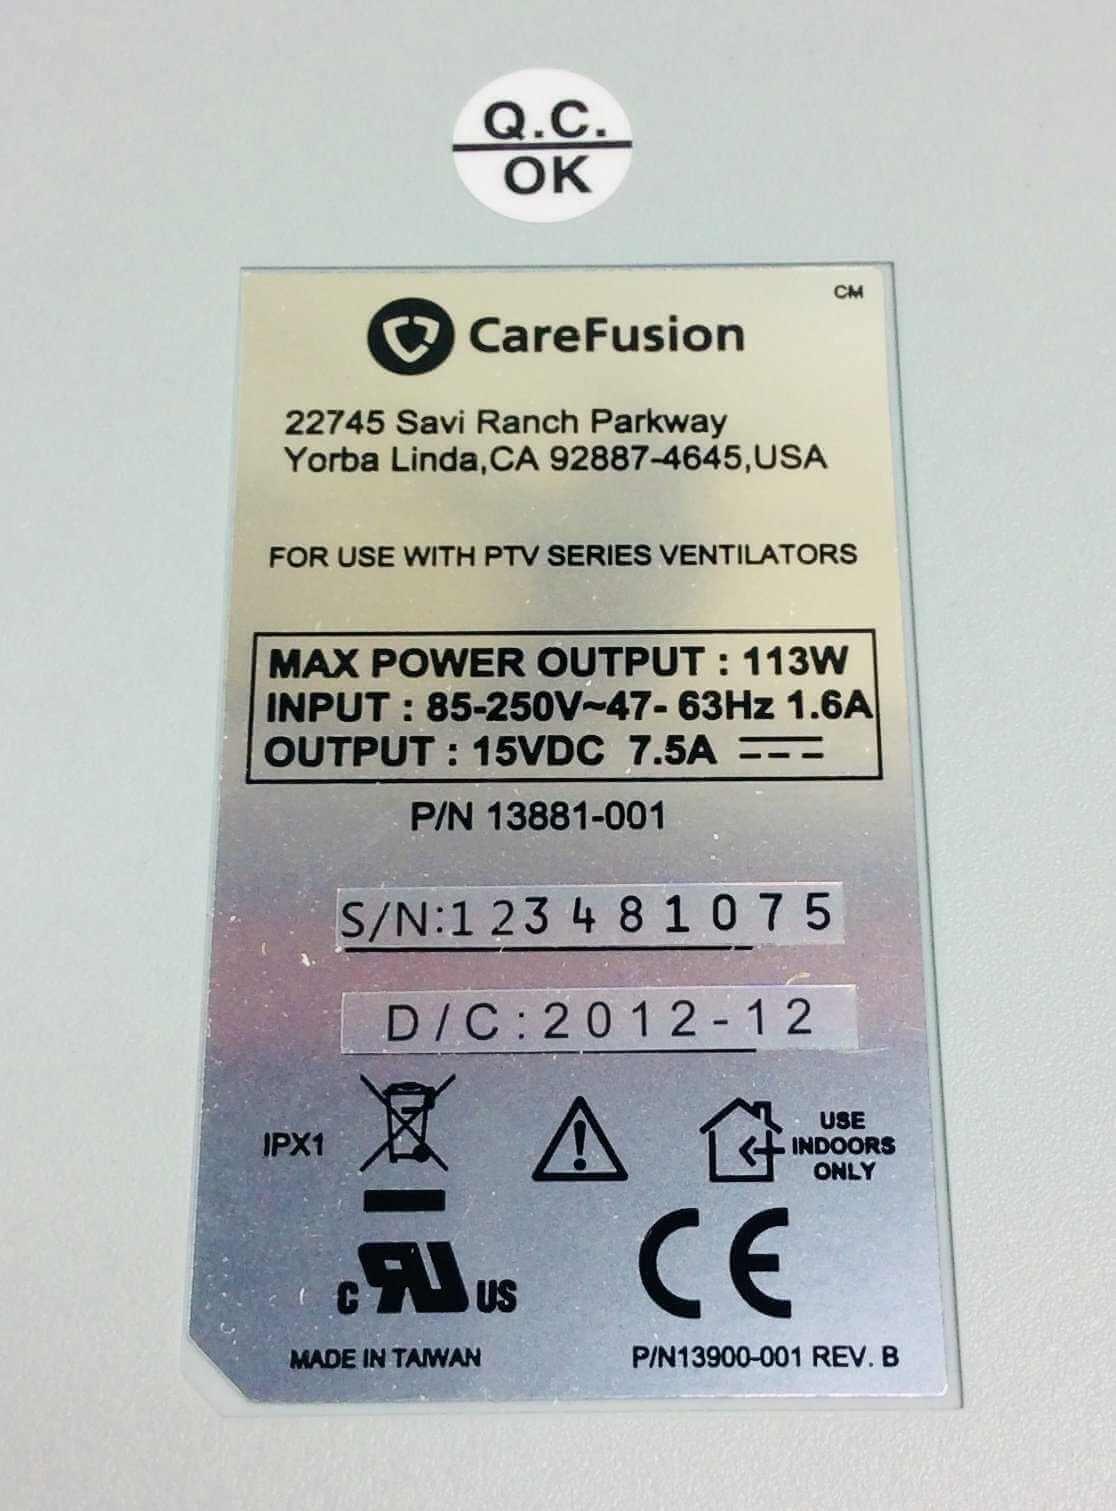 NEW CareFusion PTV EnVe ReVel Ventilator AC Power Adapter with Power Cord 12103-001 Warranty FREE Shipping - MBR Medicals